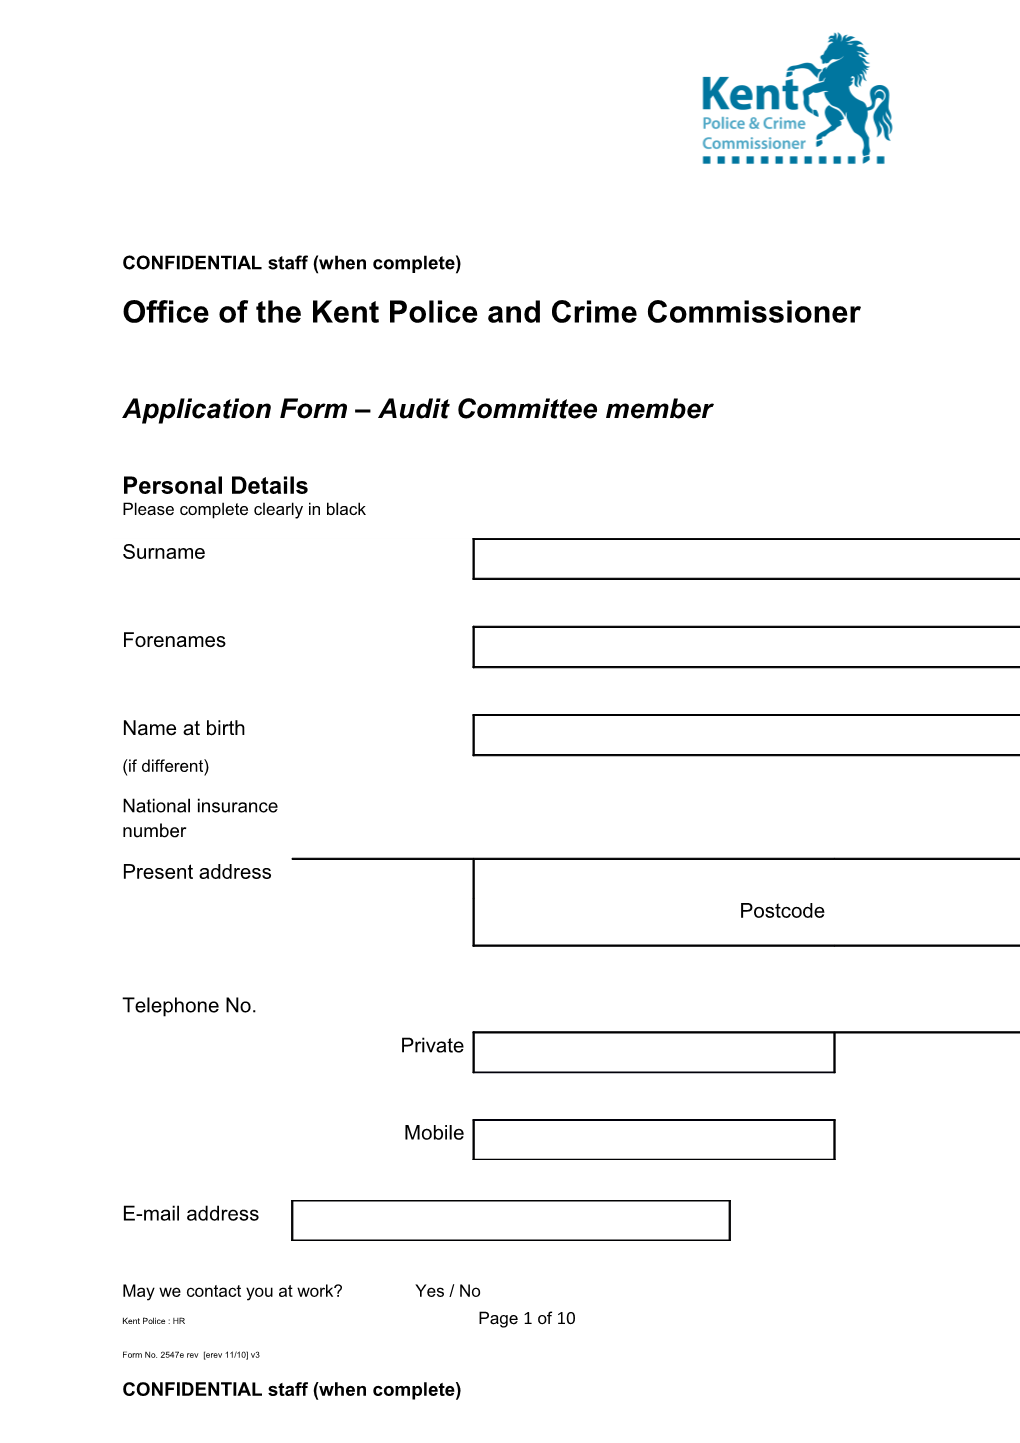 Office of the Kent Police and Crime Commissioner